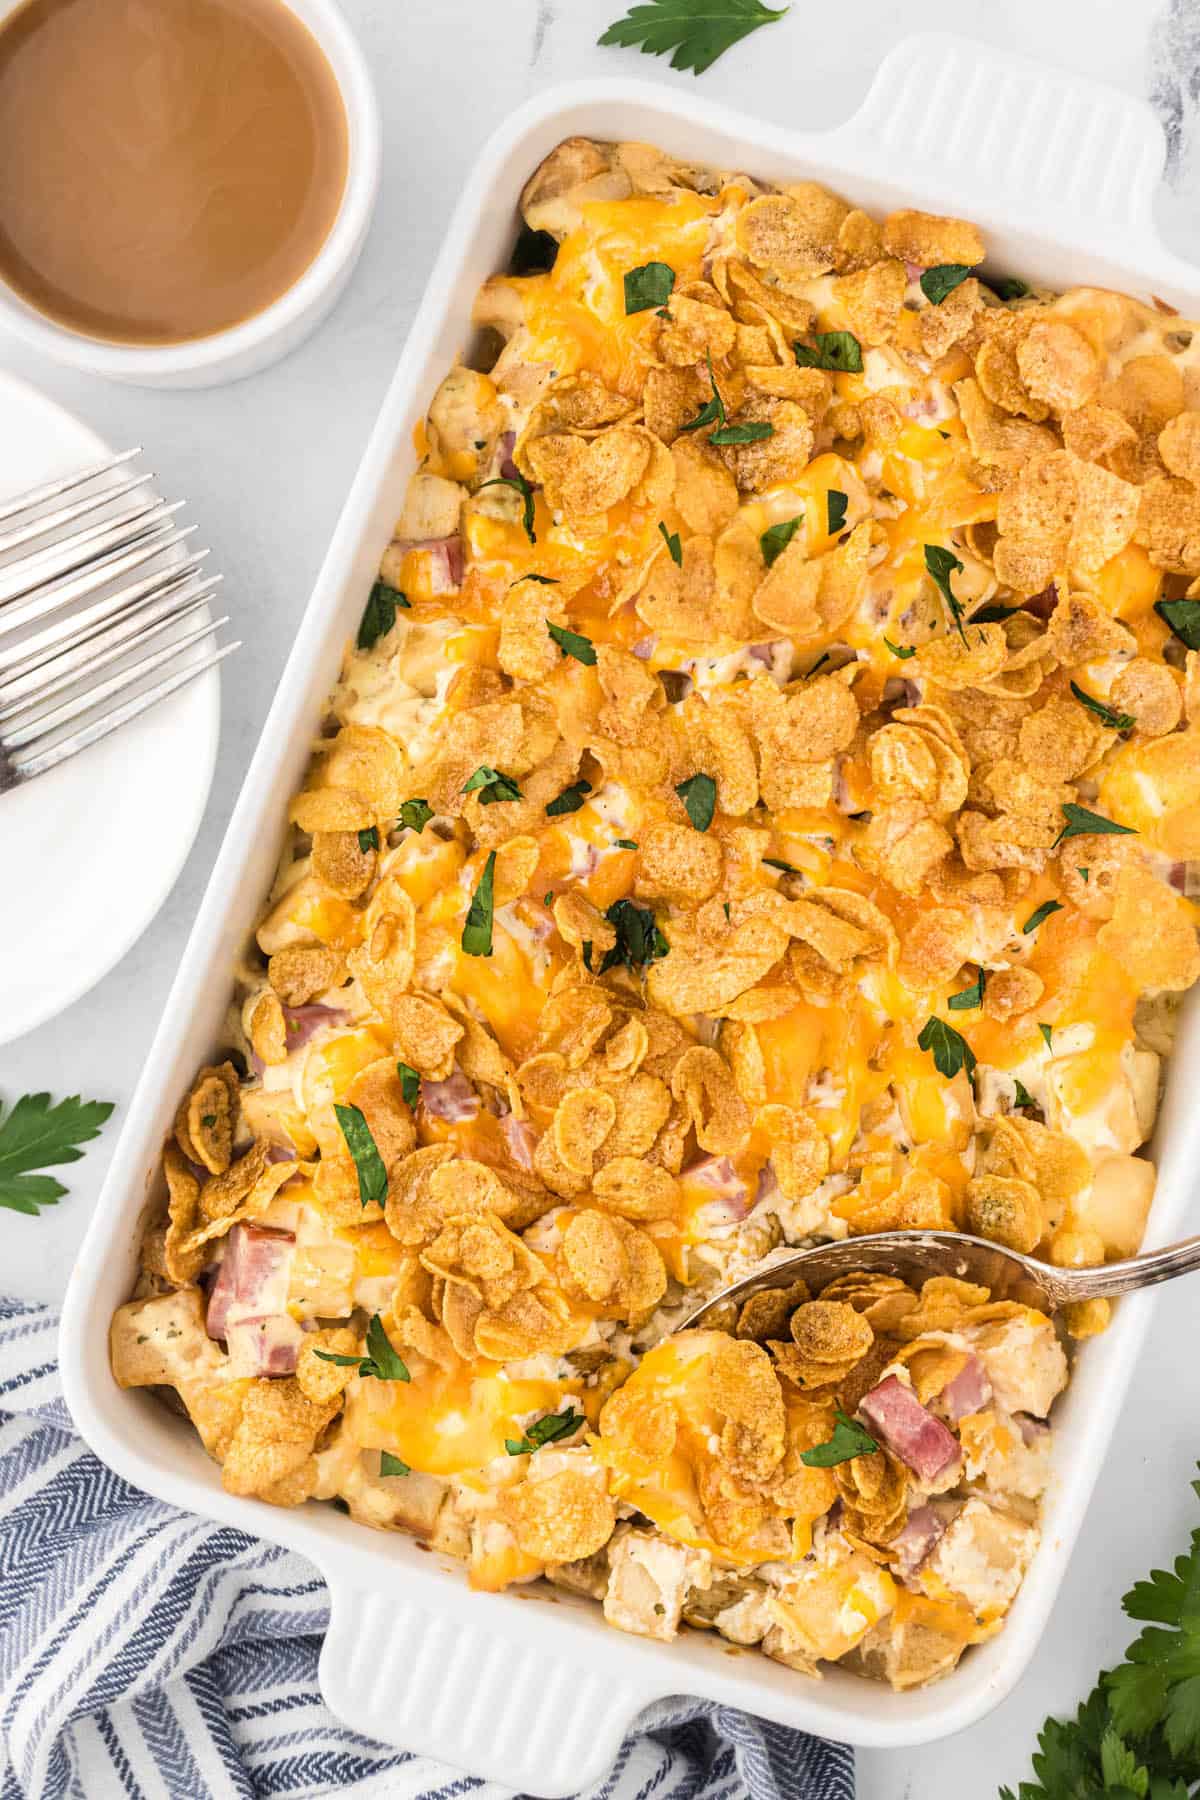 Hashbrown casserole in baking dish, topped with cornflakes. With a serving spoon.